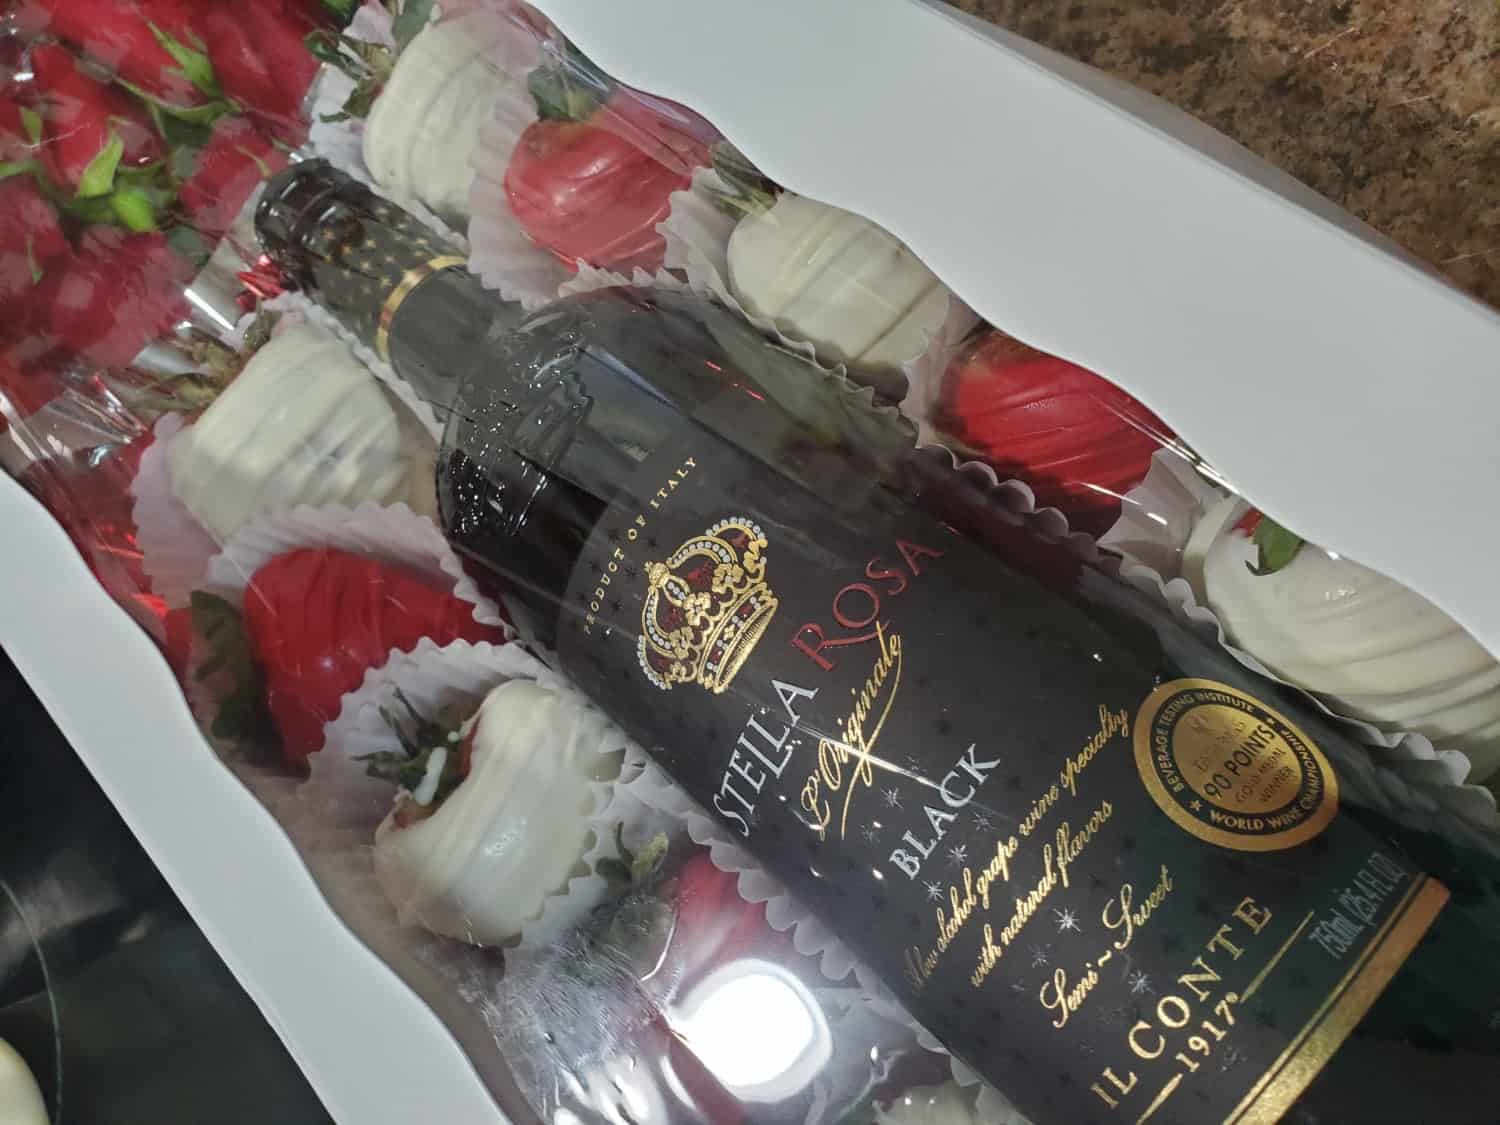 This Wine and Rose Box is made with love by What A Delightful Treat! Shop more unique gift ideas today with Spots Initiatives, the best way to support creators.